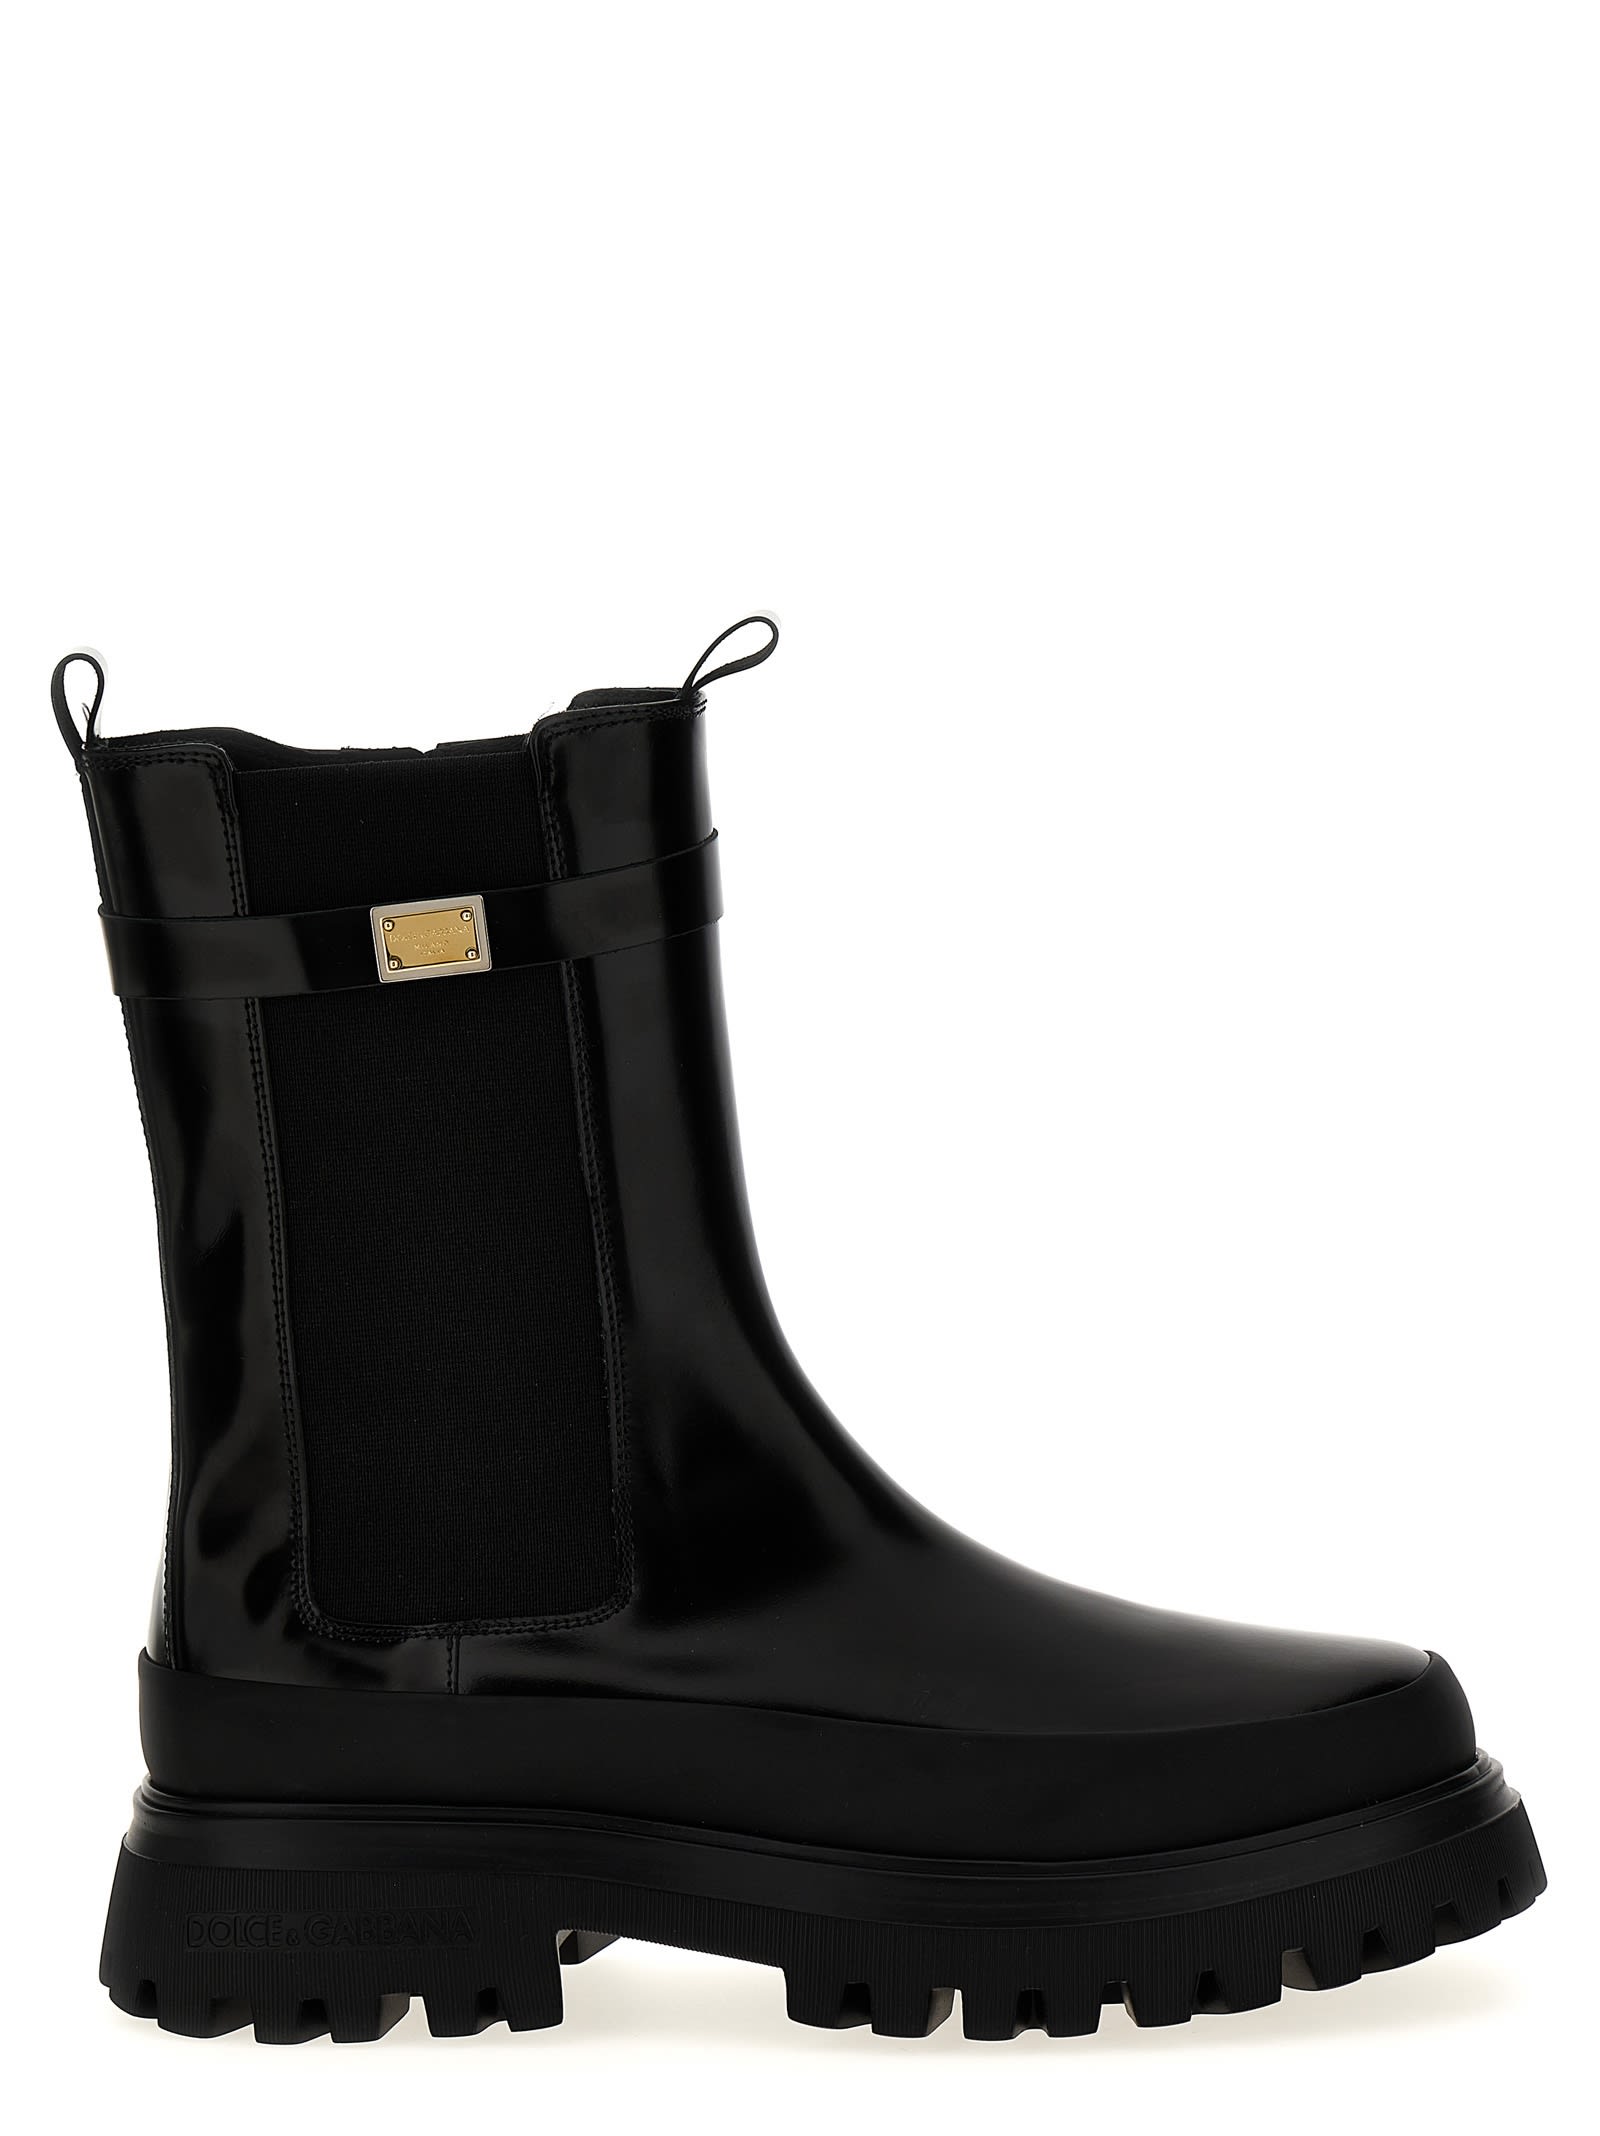 DOLCE & GABBANA LOGO LEATHER ANKLE BOOTS